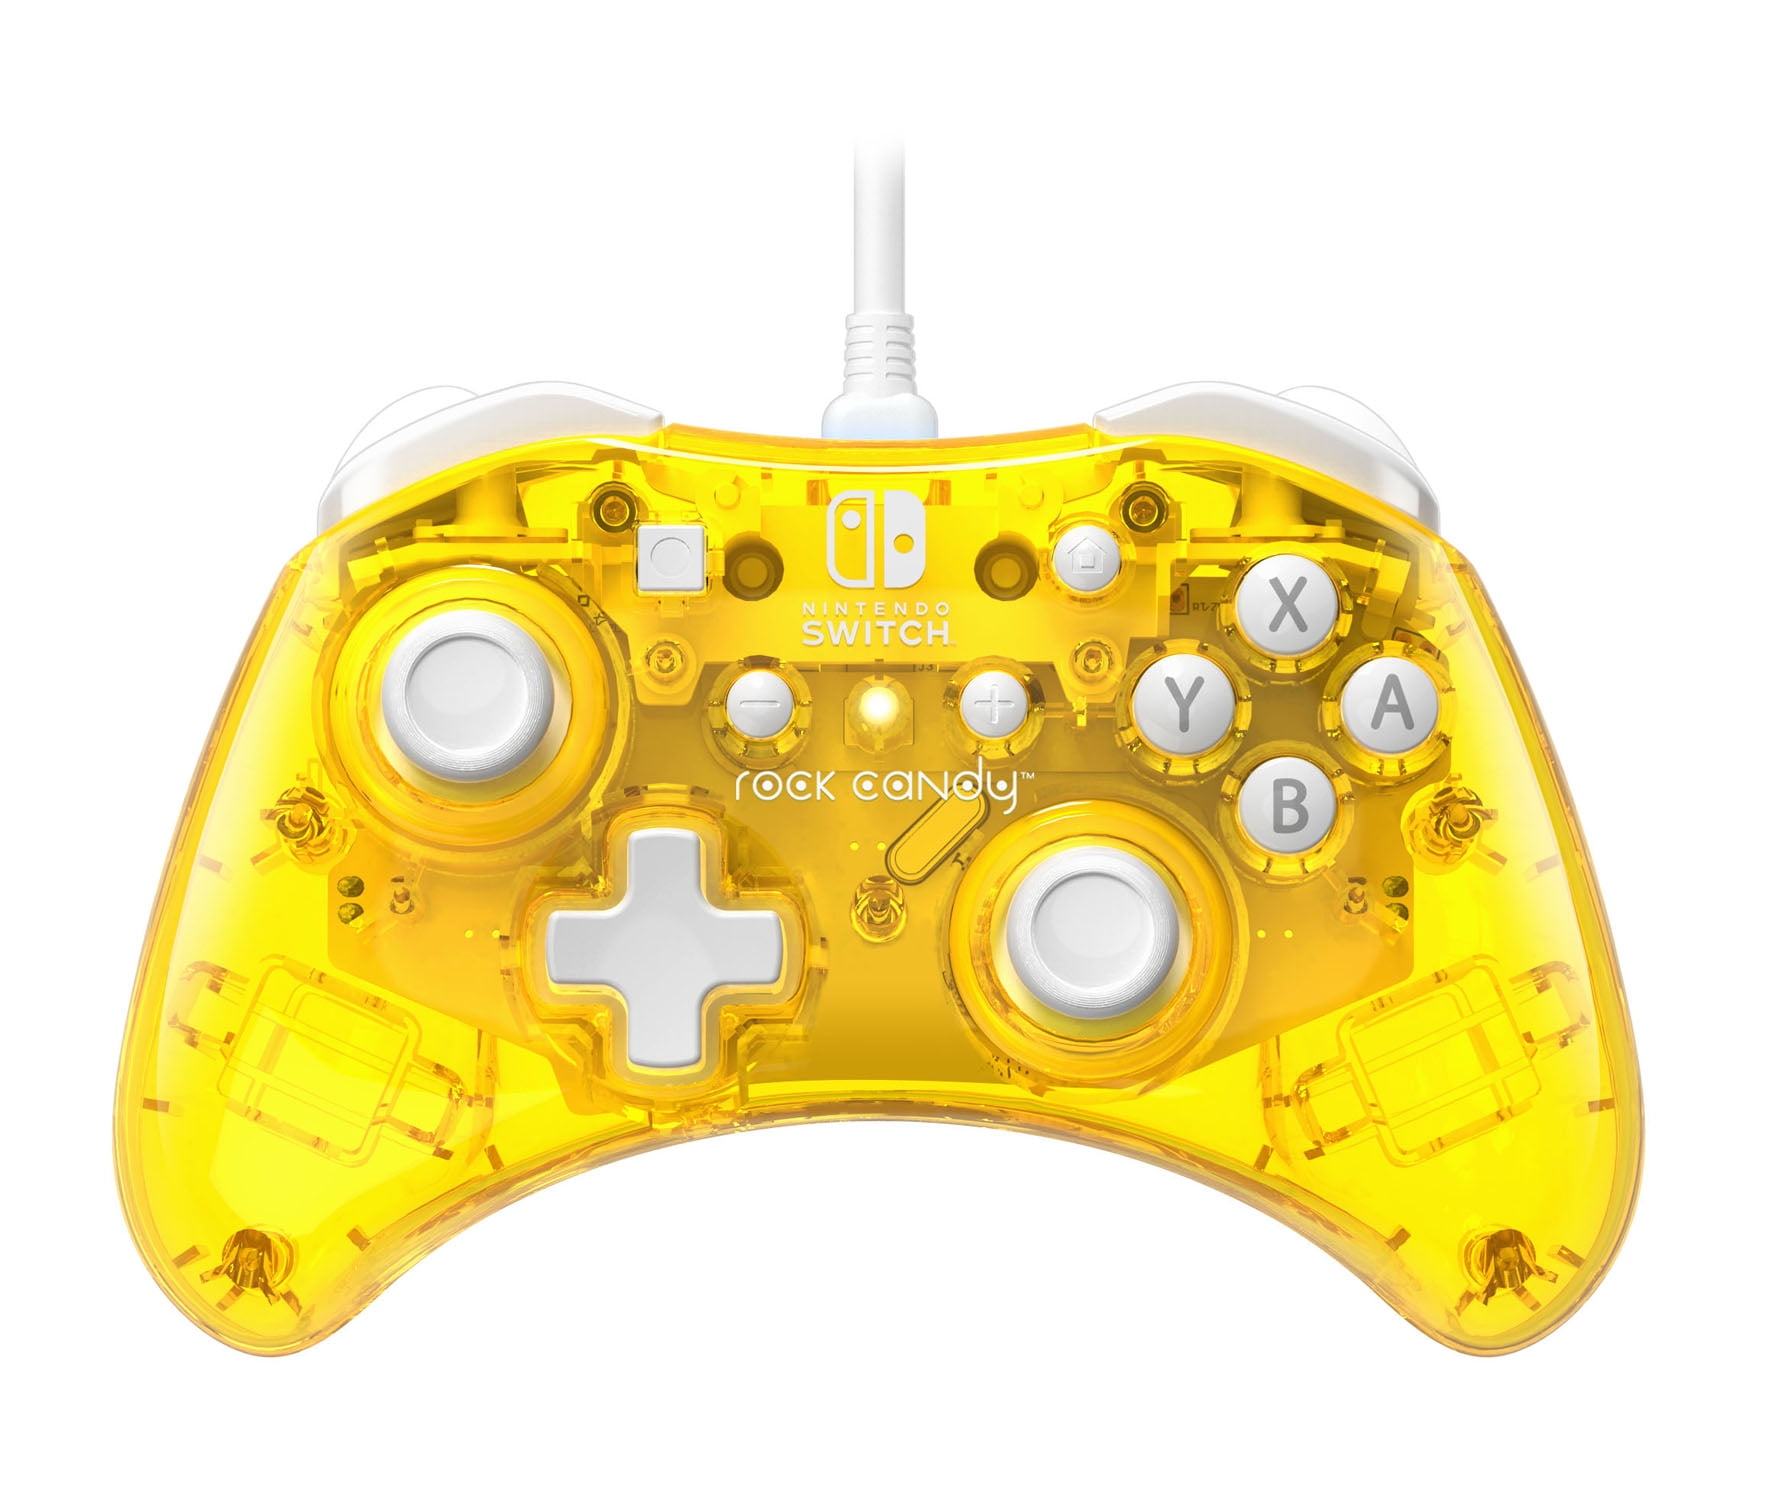 Pdp Nintendo Switch Rock Candy Controller Yellow 500 181 Na Yl